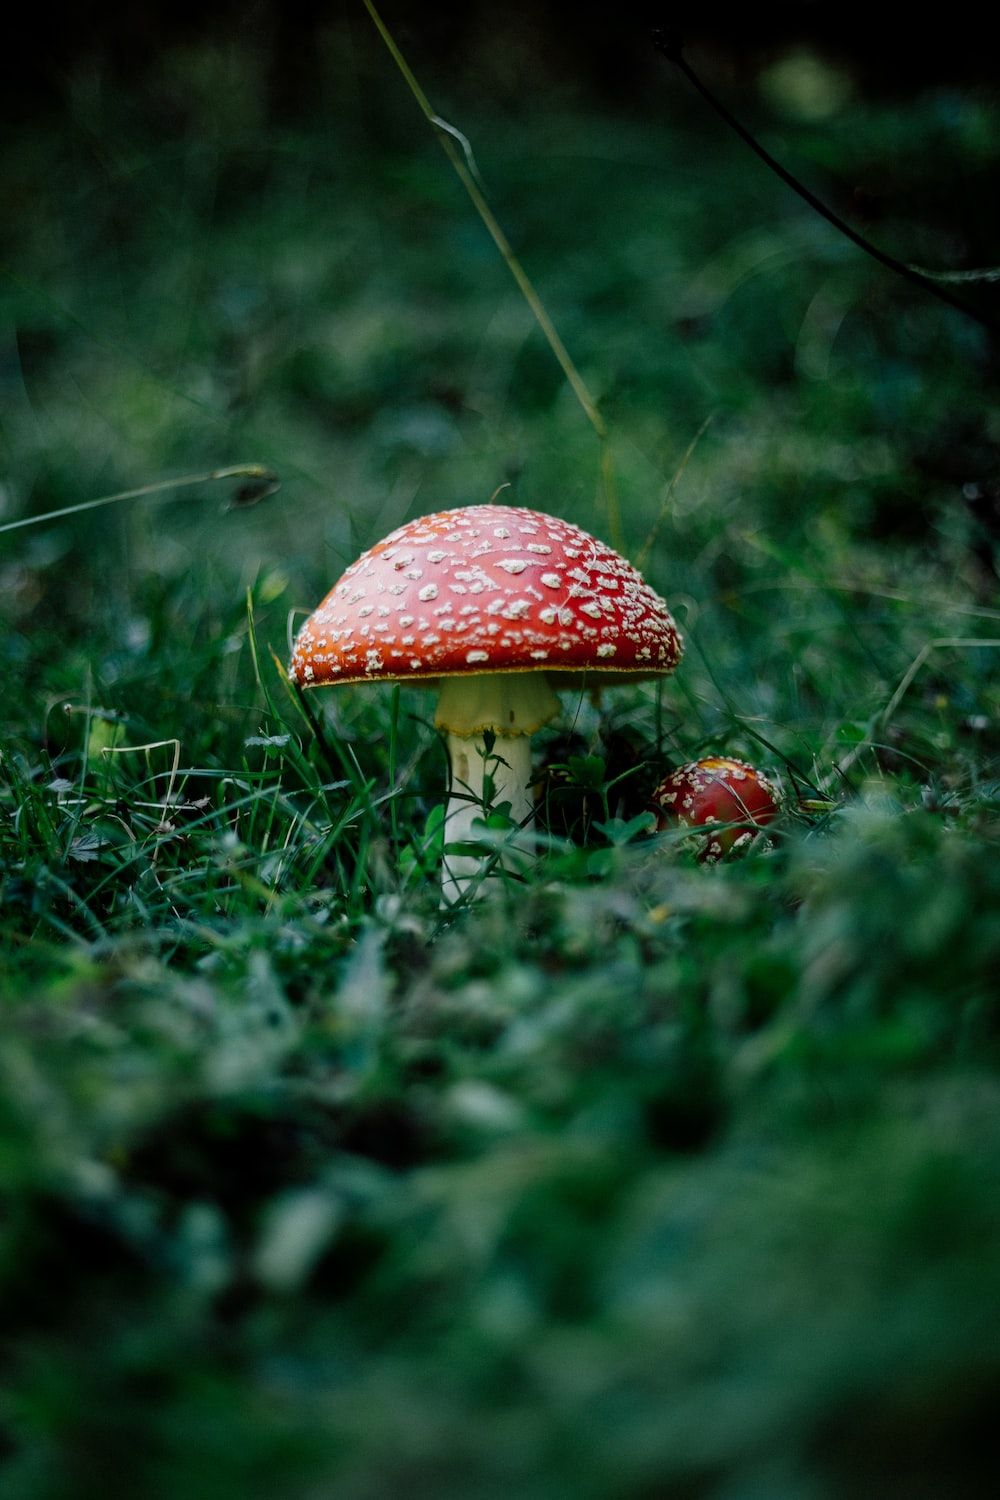 Red Mushroom Picture. Download Free Image